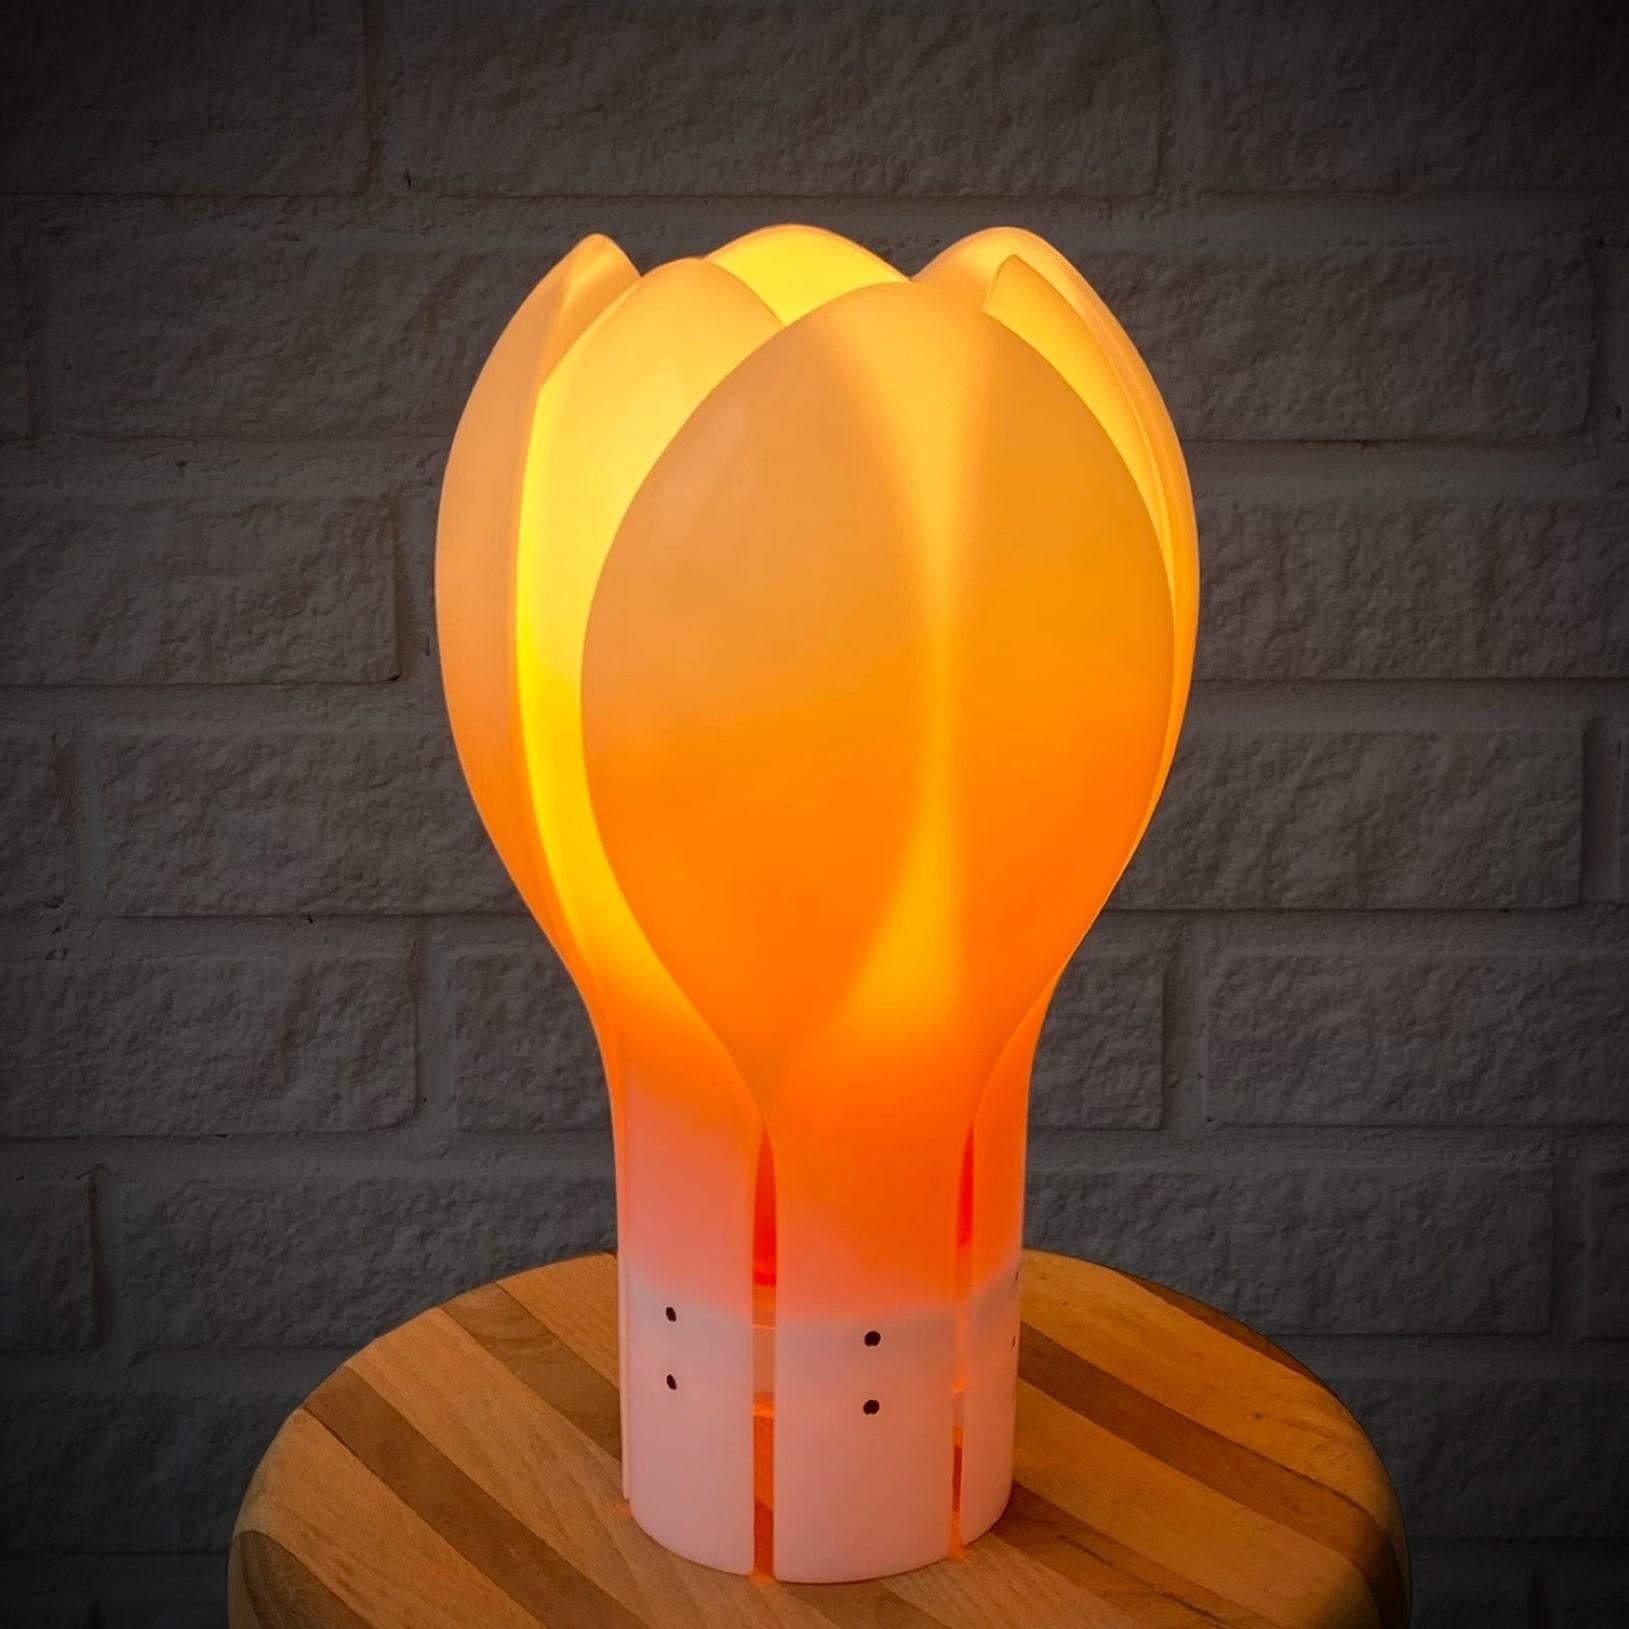 Table lamp ‘Tulip’ designed in the 1970’s by the Swedish architect Yngve Ekström. Made from white acrylic with clear details. It features an orange inner shade that imparts a warm and cozy tone to the light. Electrified with one lamp holder inside